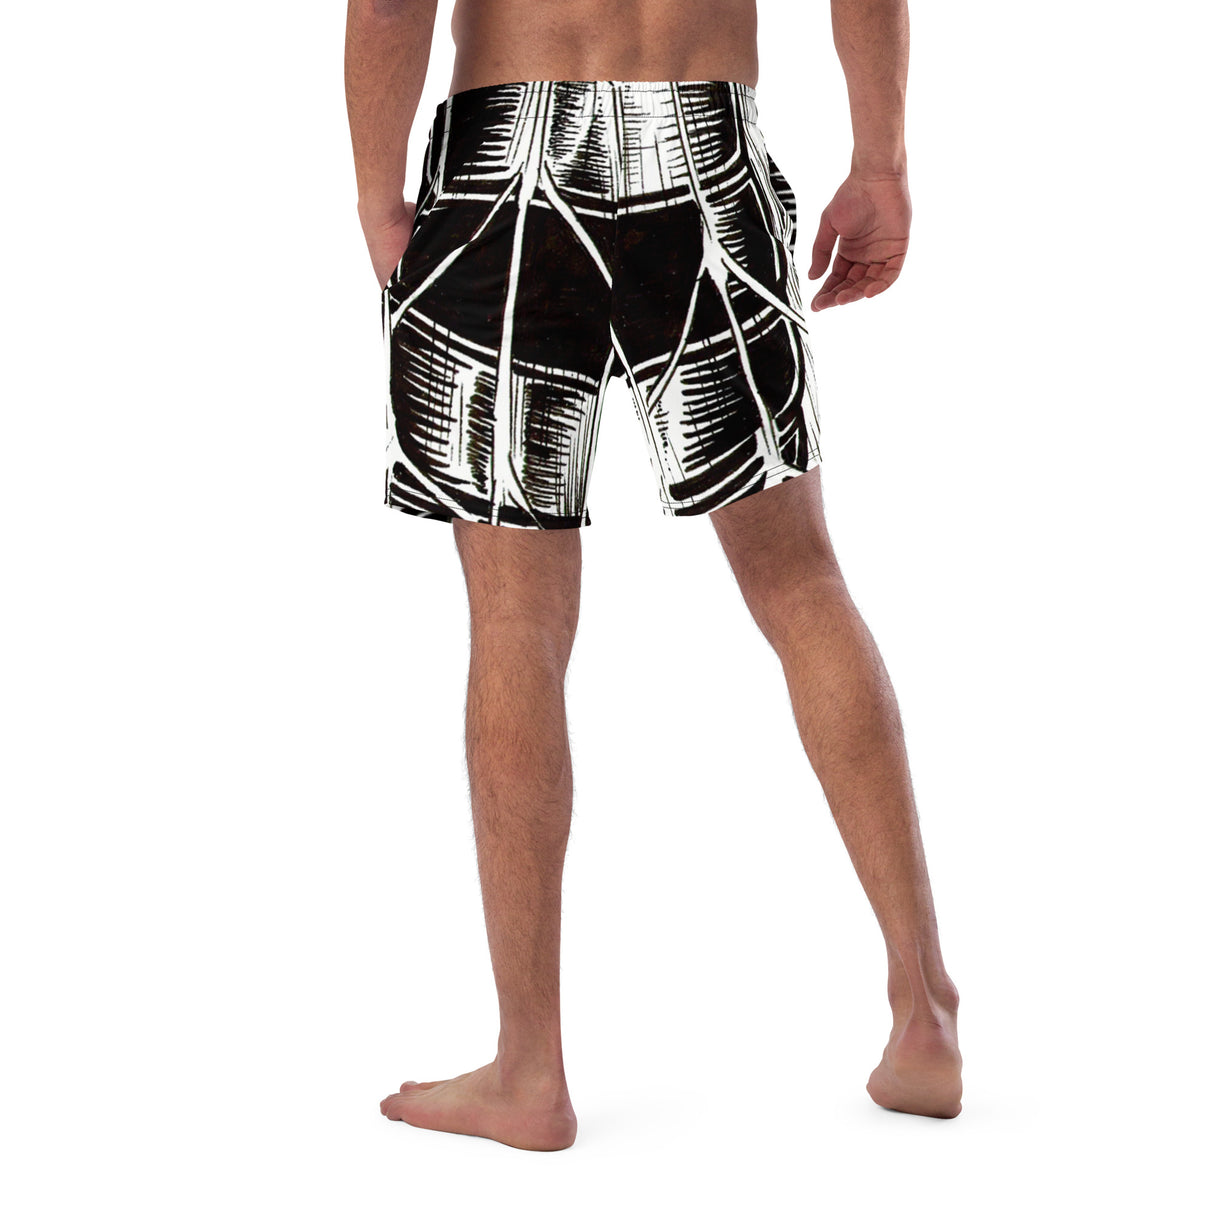 Men's Swim Trunks and Shorts - UPF 50+ with Hive Bee Print